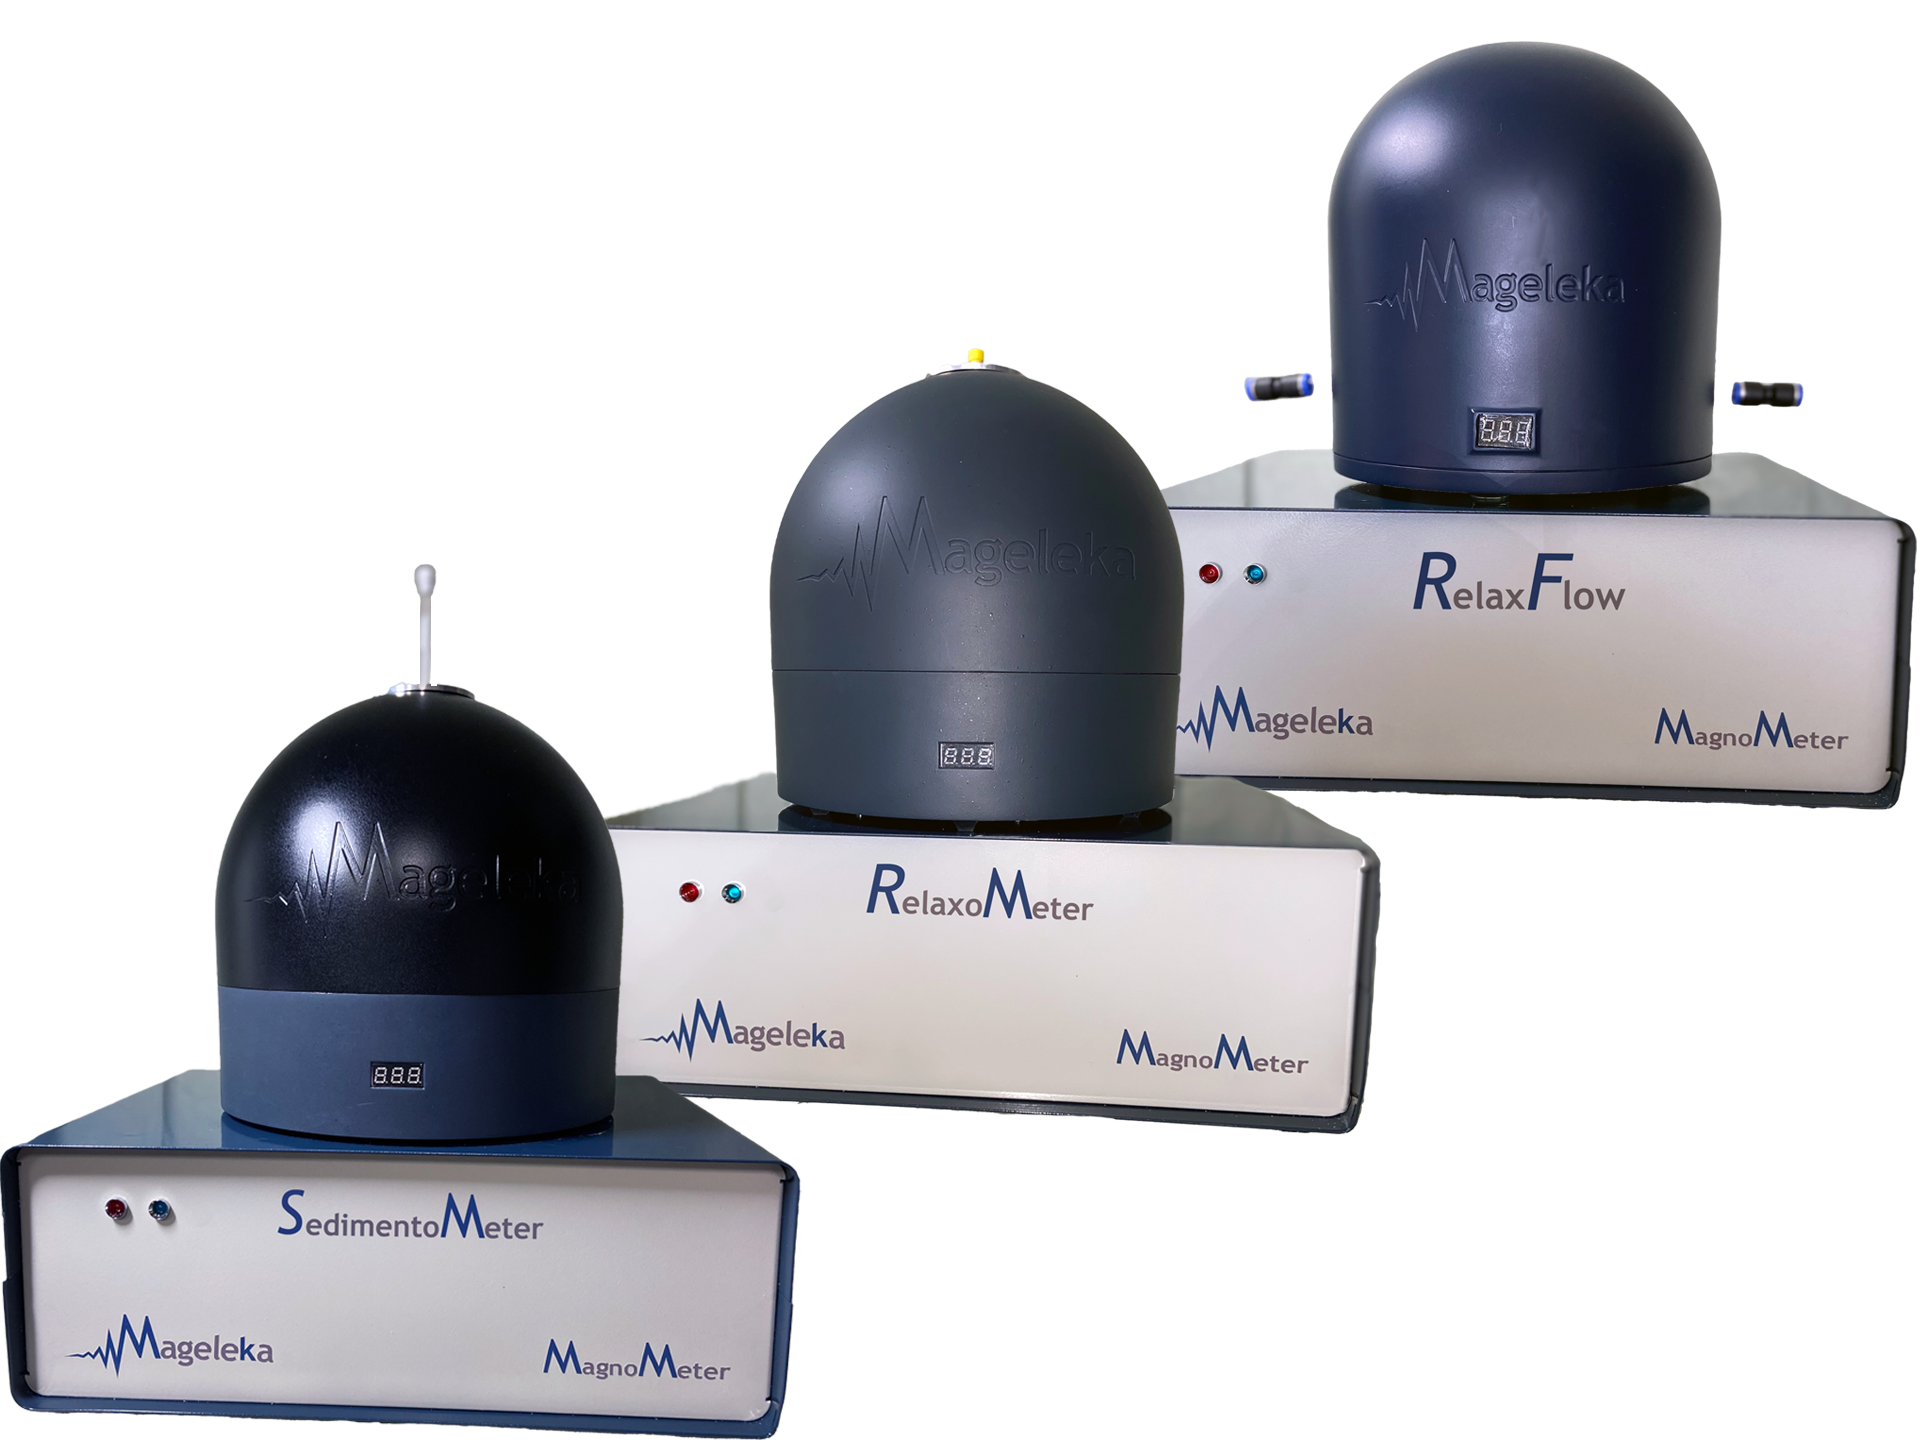 Mageleka MagnoMeter™ XRS - A device that uses NMR relaxation for non-invasive routine analysis of complex solid-liquid and liquid-liquid formulations